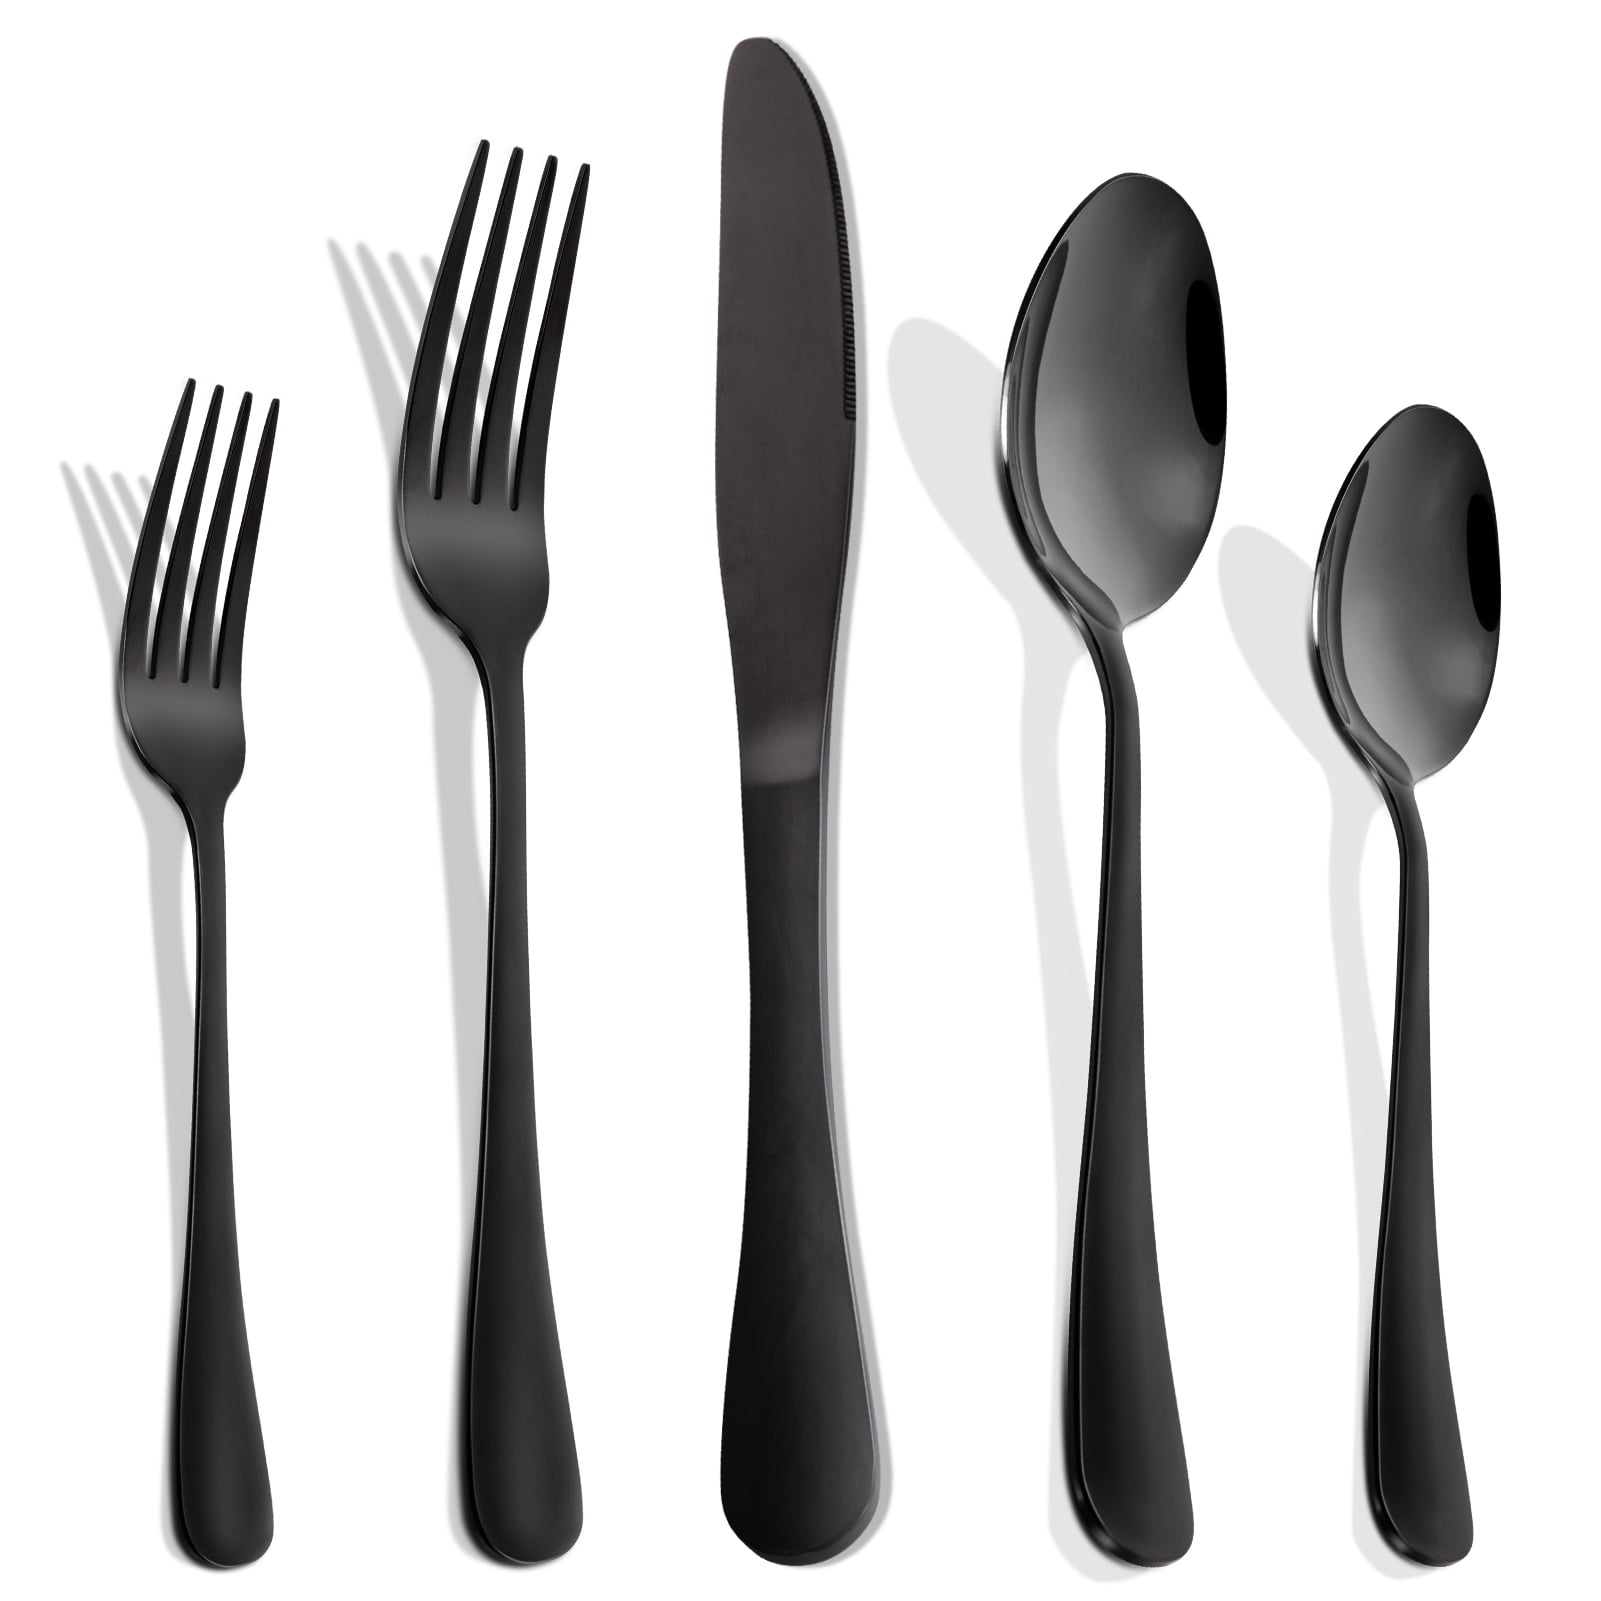 AOOSY 4 Pieces Stainless Steel Dessert Forks Dessert Forks Use for Home Kitchen or Restaurant 